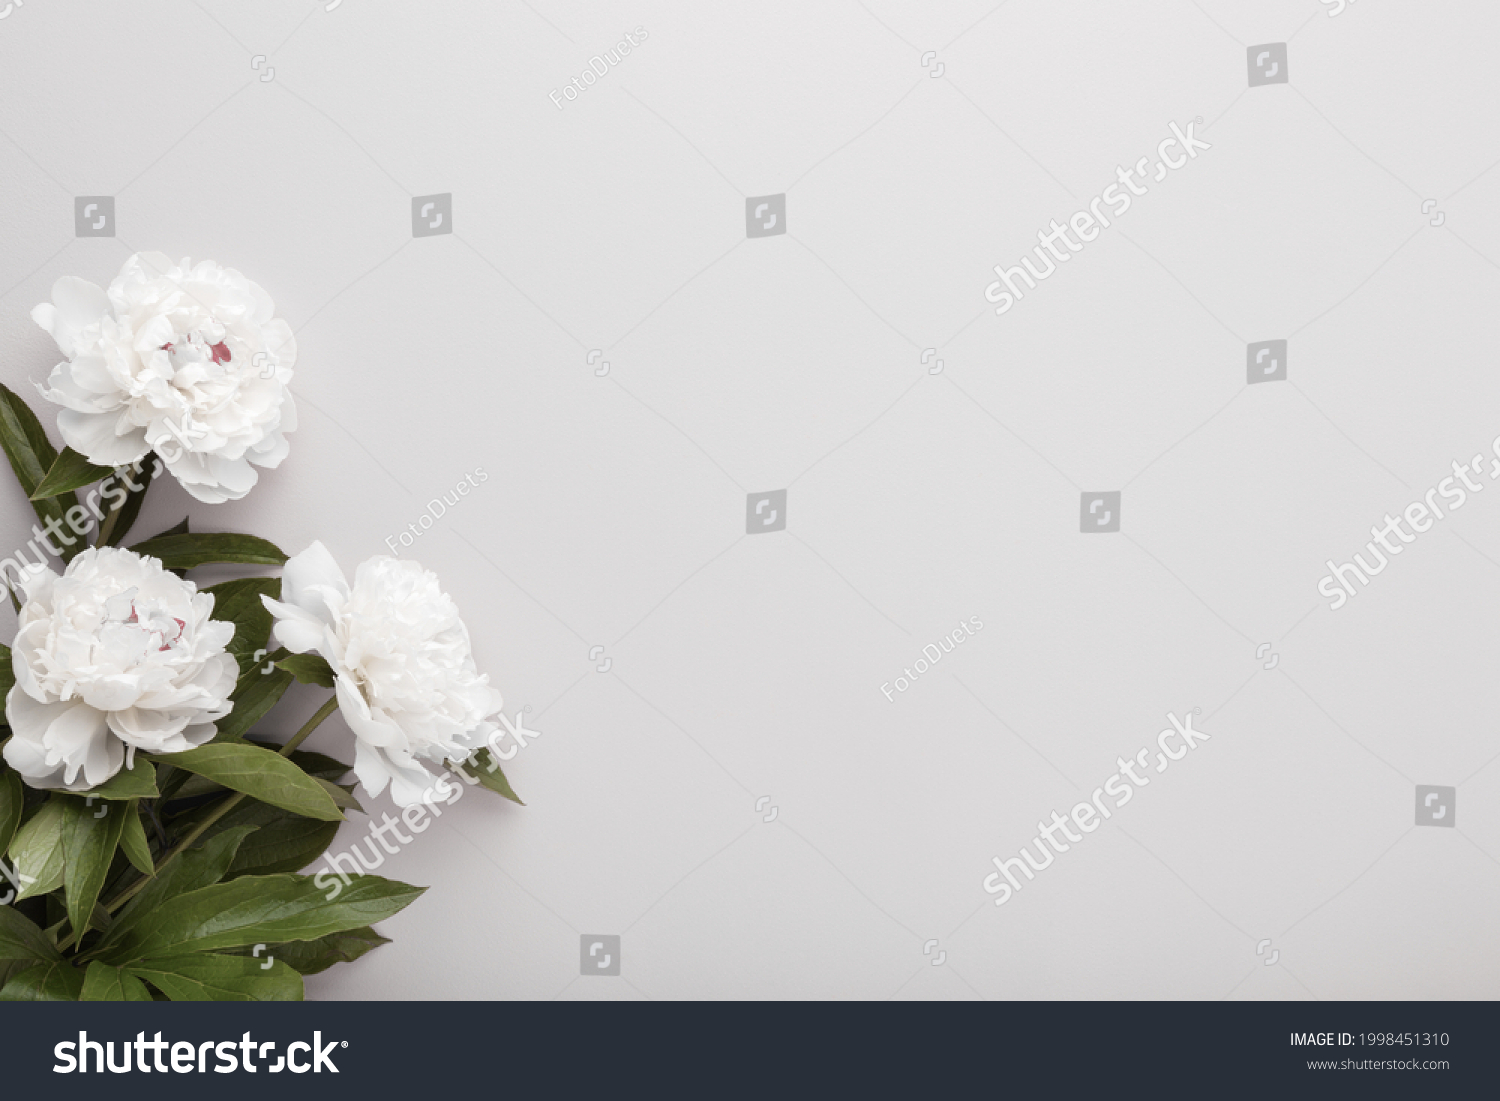 Fresh white peony flowers on light gray table background. Empty place for emotional, sentimental text, quote or sayings. Closeup. #1998451310